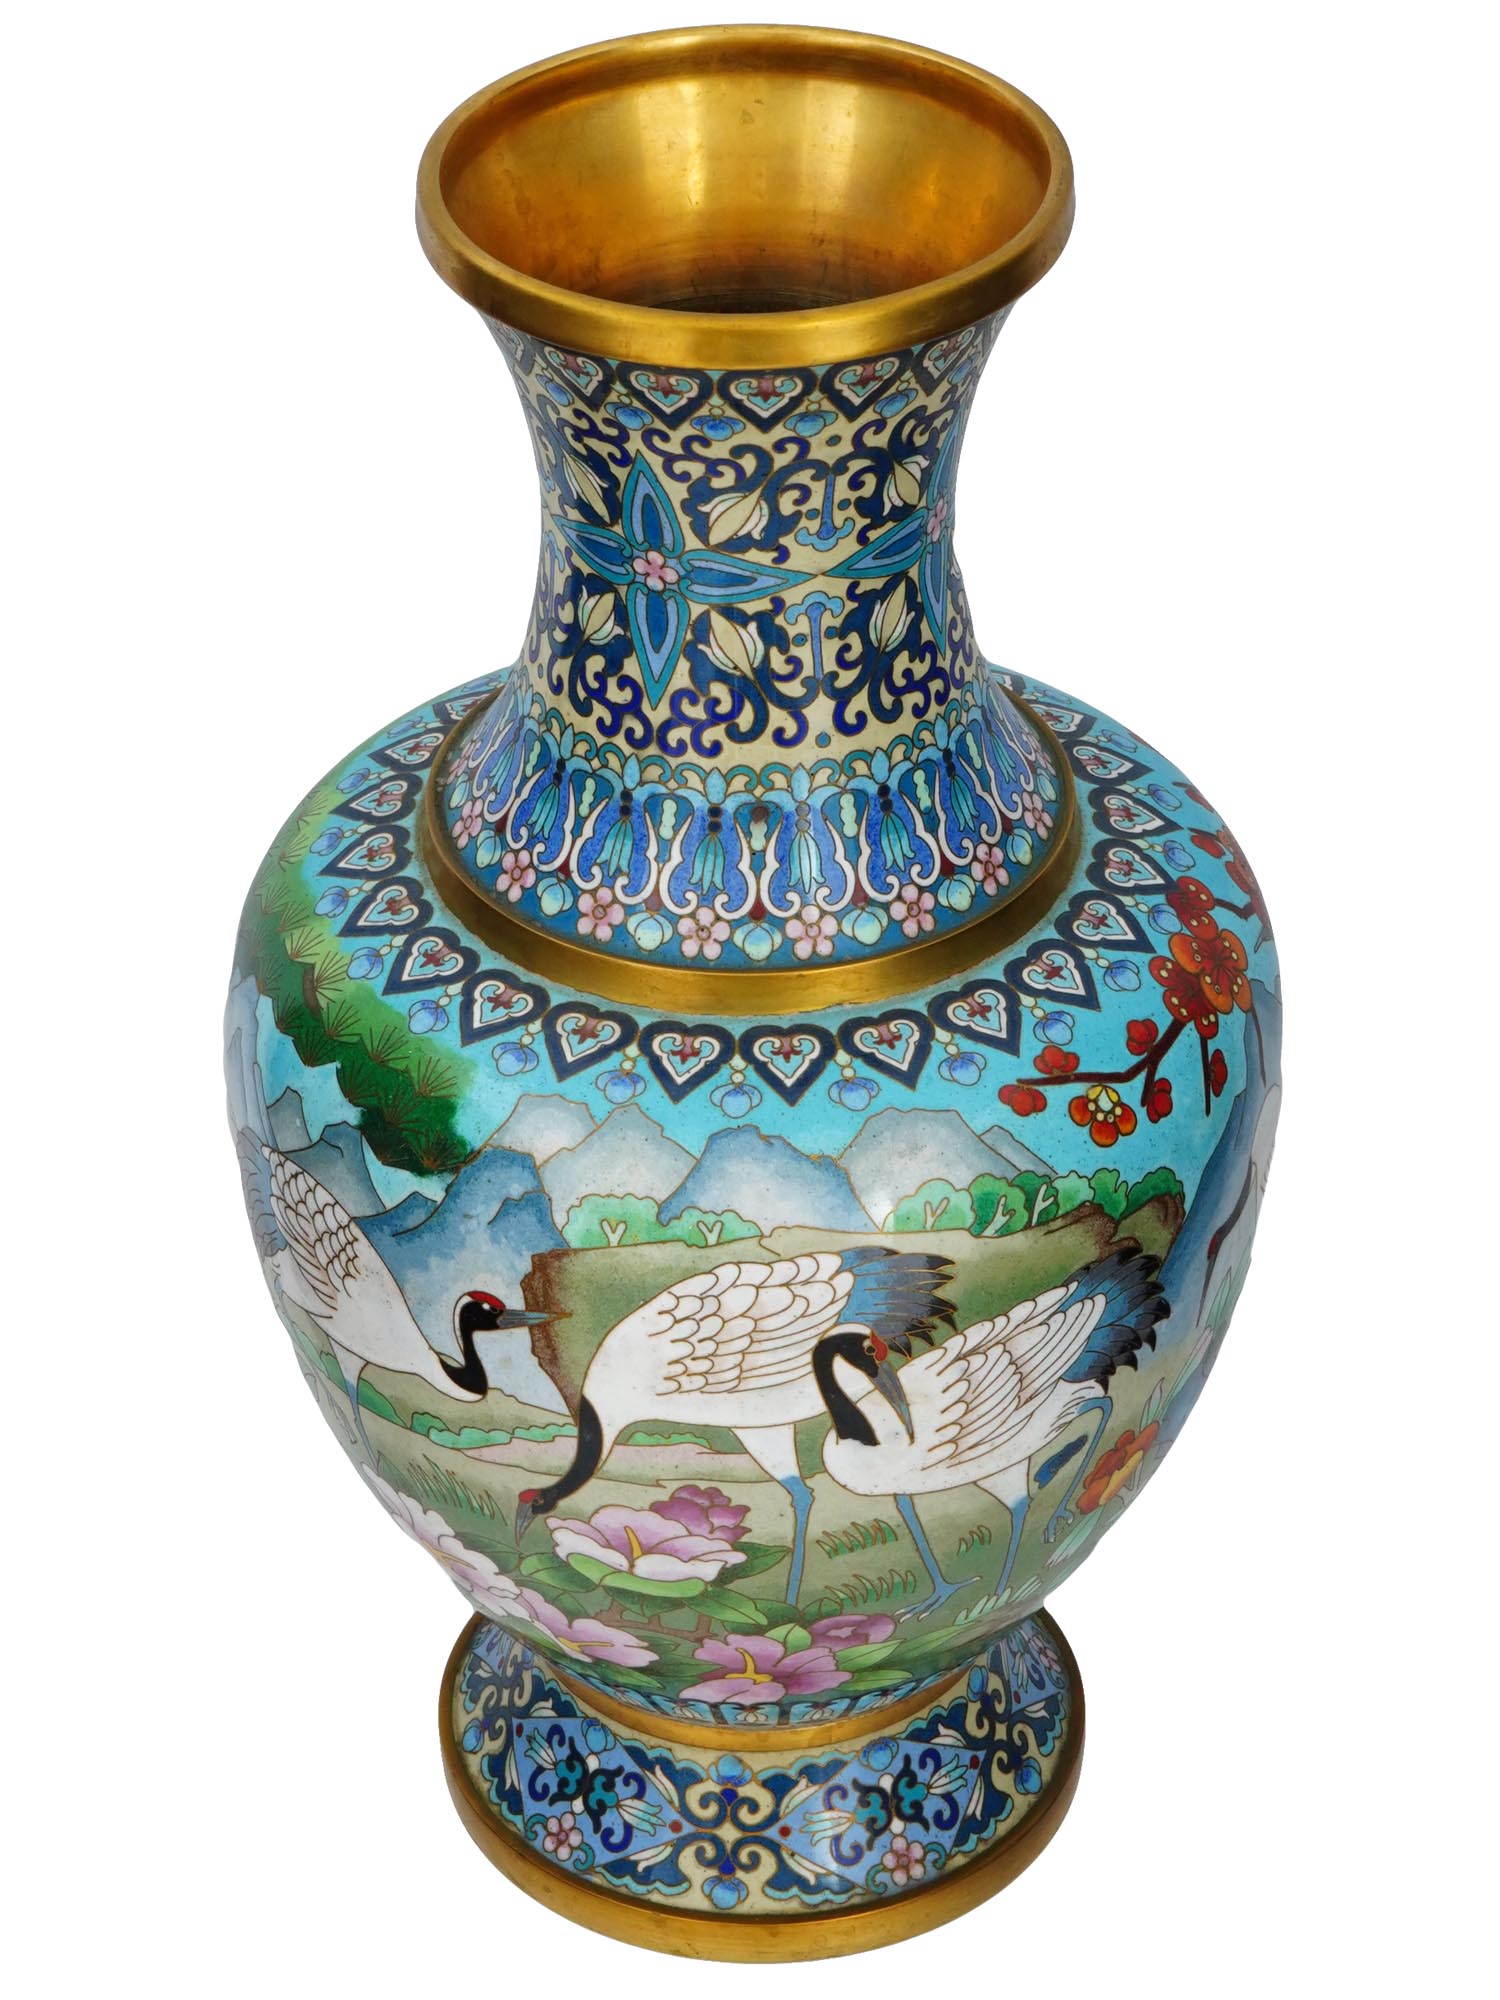 ANTIQUE CHINESE QING CLOISONNE ENAMEL VASE WITH BIRDS PIC-1